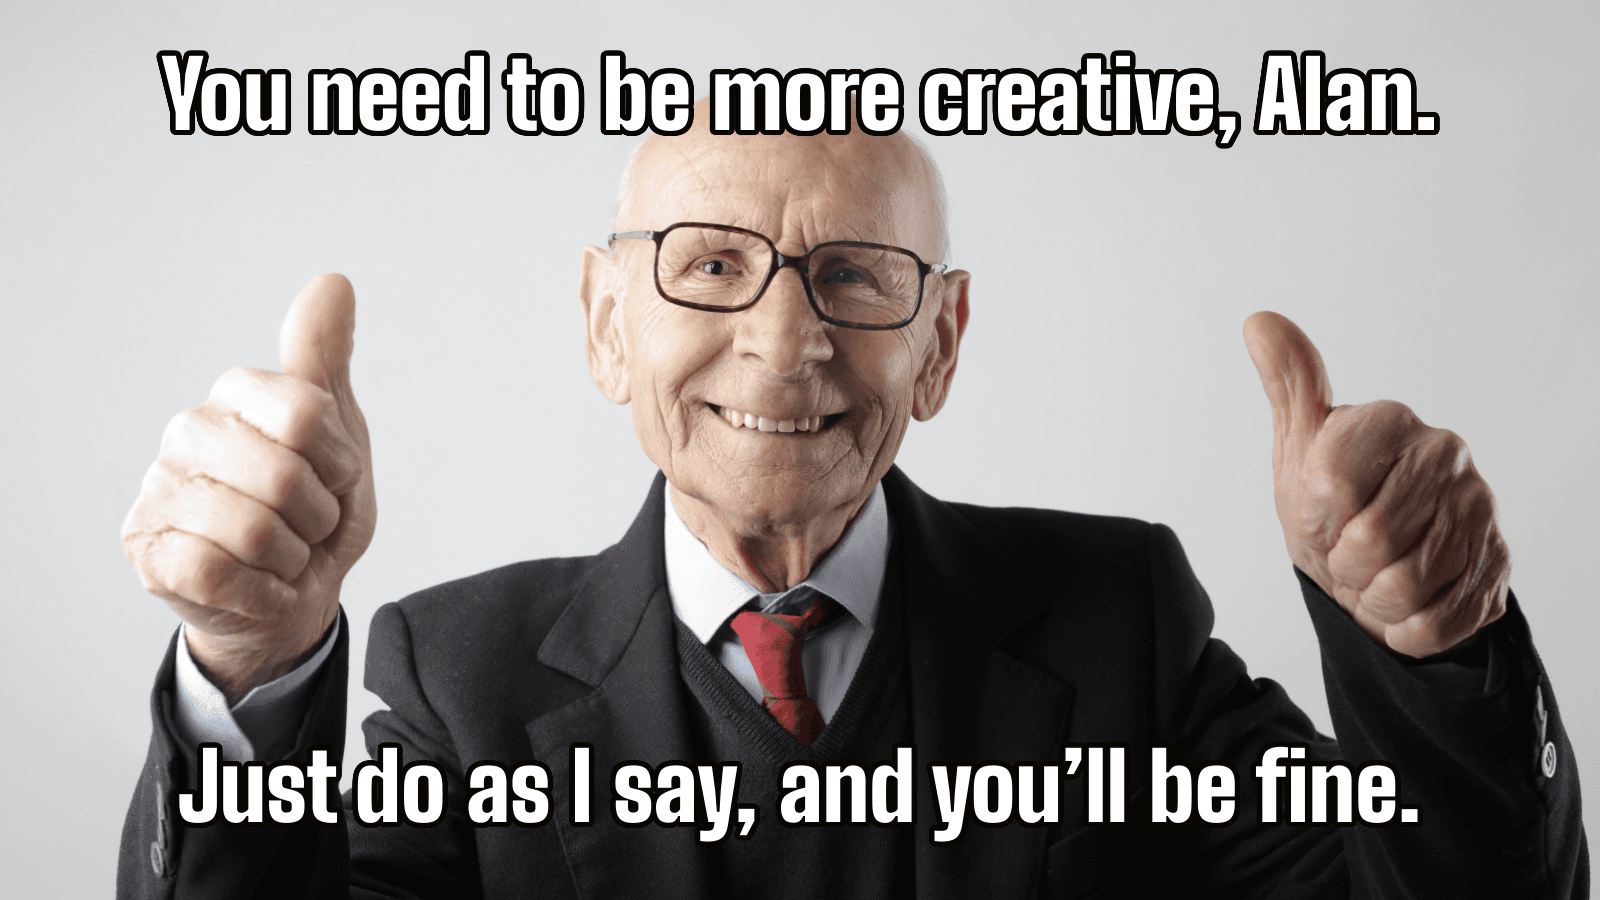 smiling-old-man-in-suit-top-and-bottom-text-meme-template-thumbnail-img